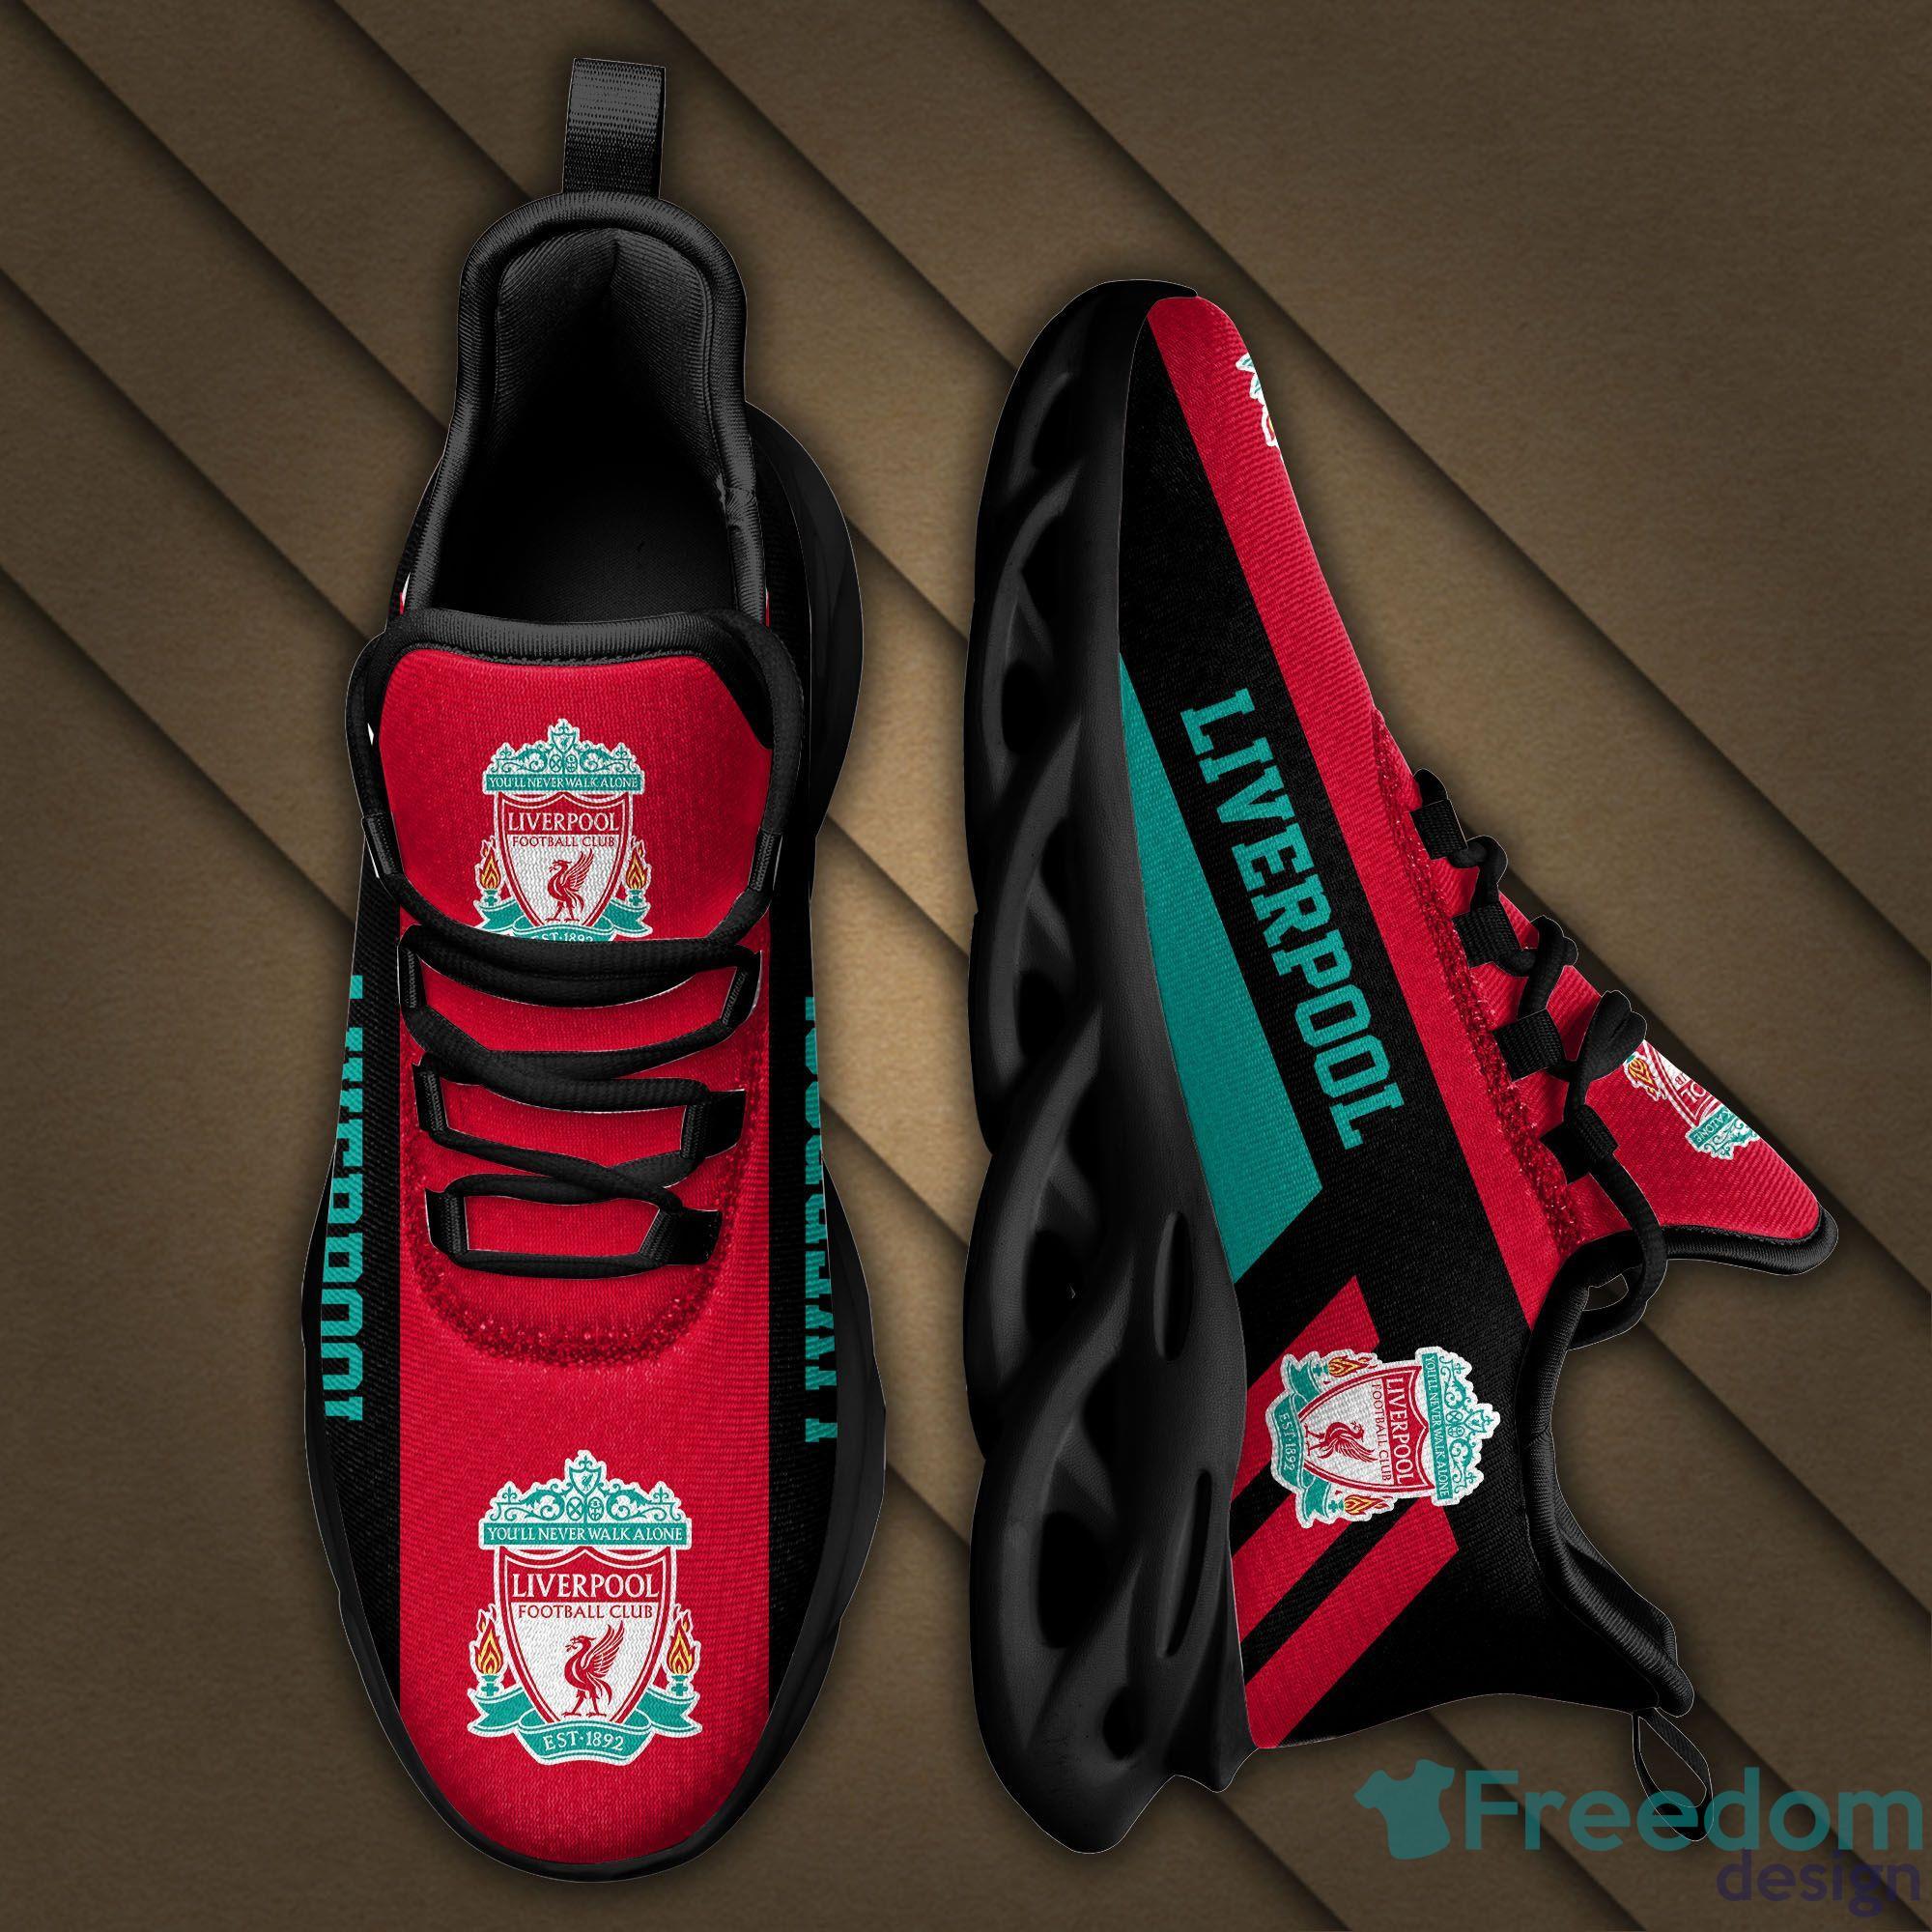 EPL Liverpool Max Soul Running Shoes Gift For Sport Lover - Freedomdesign